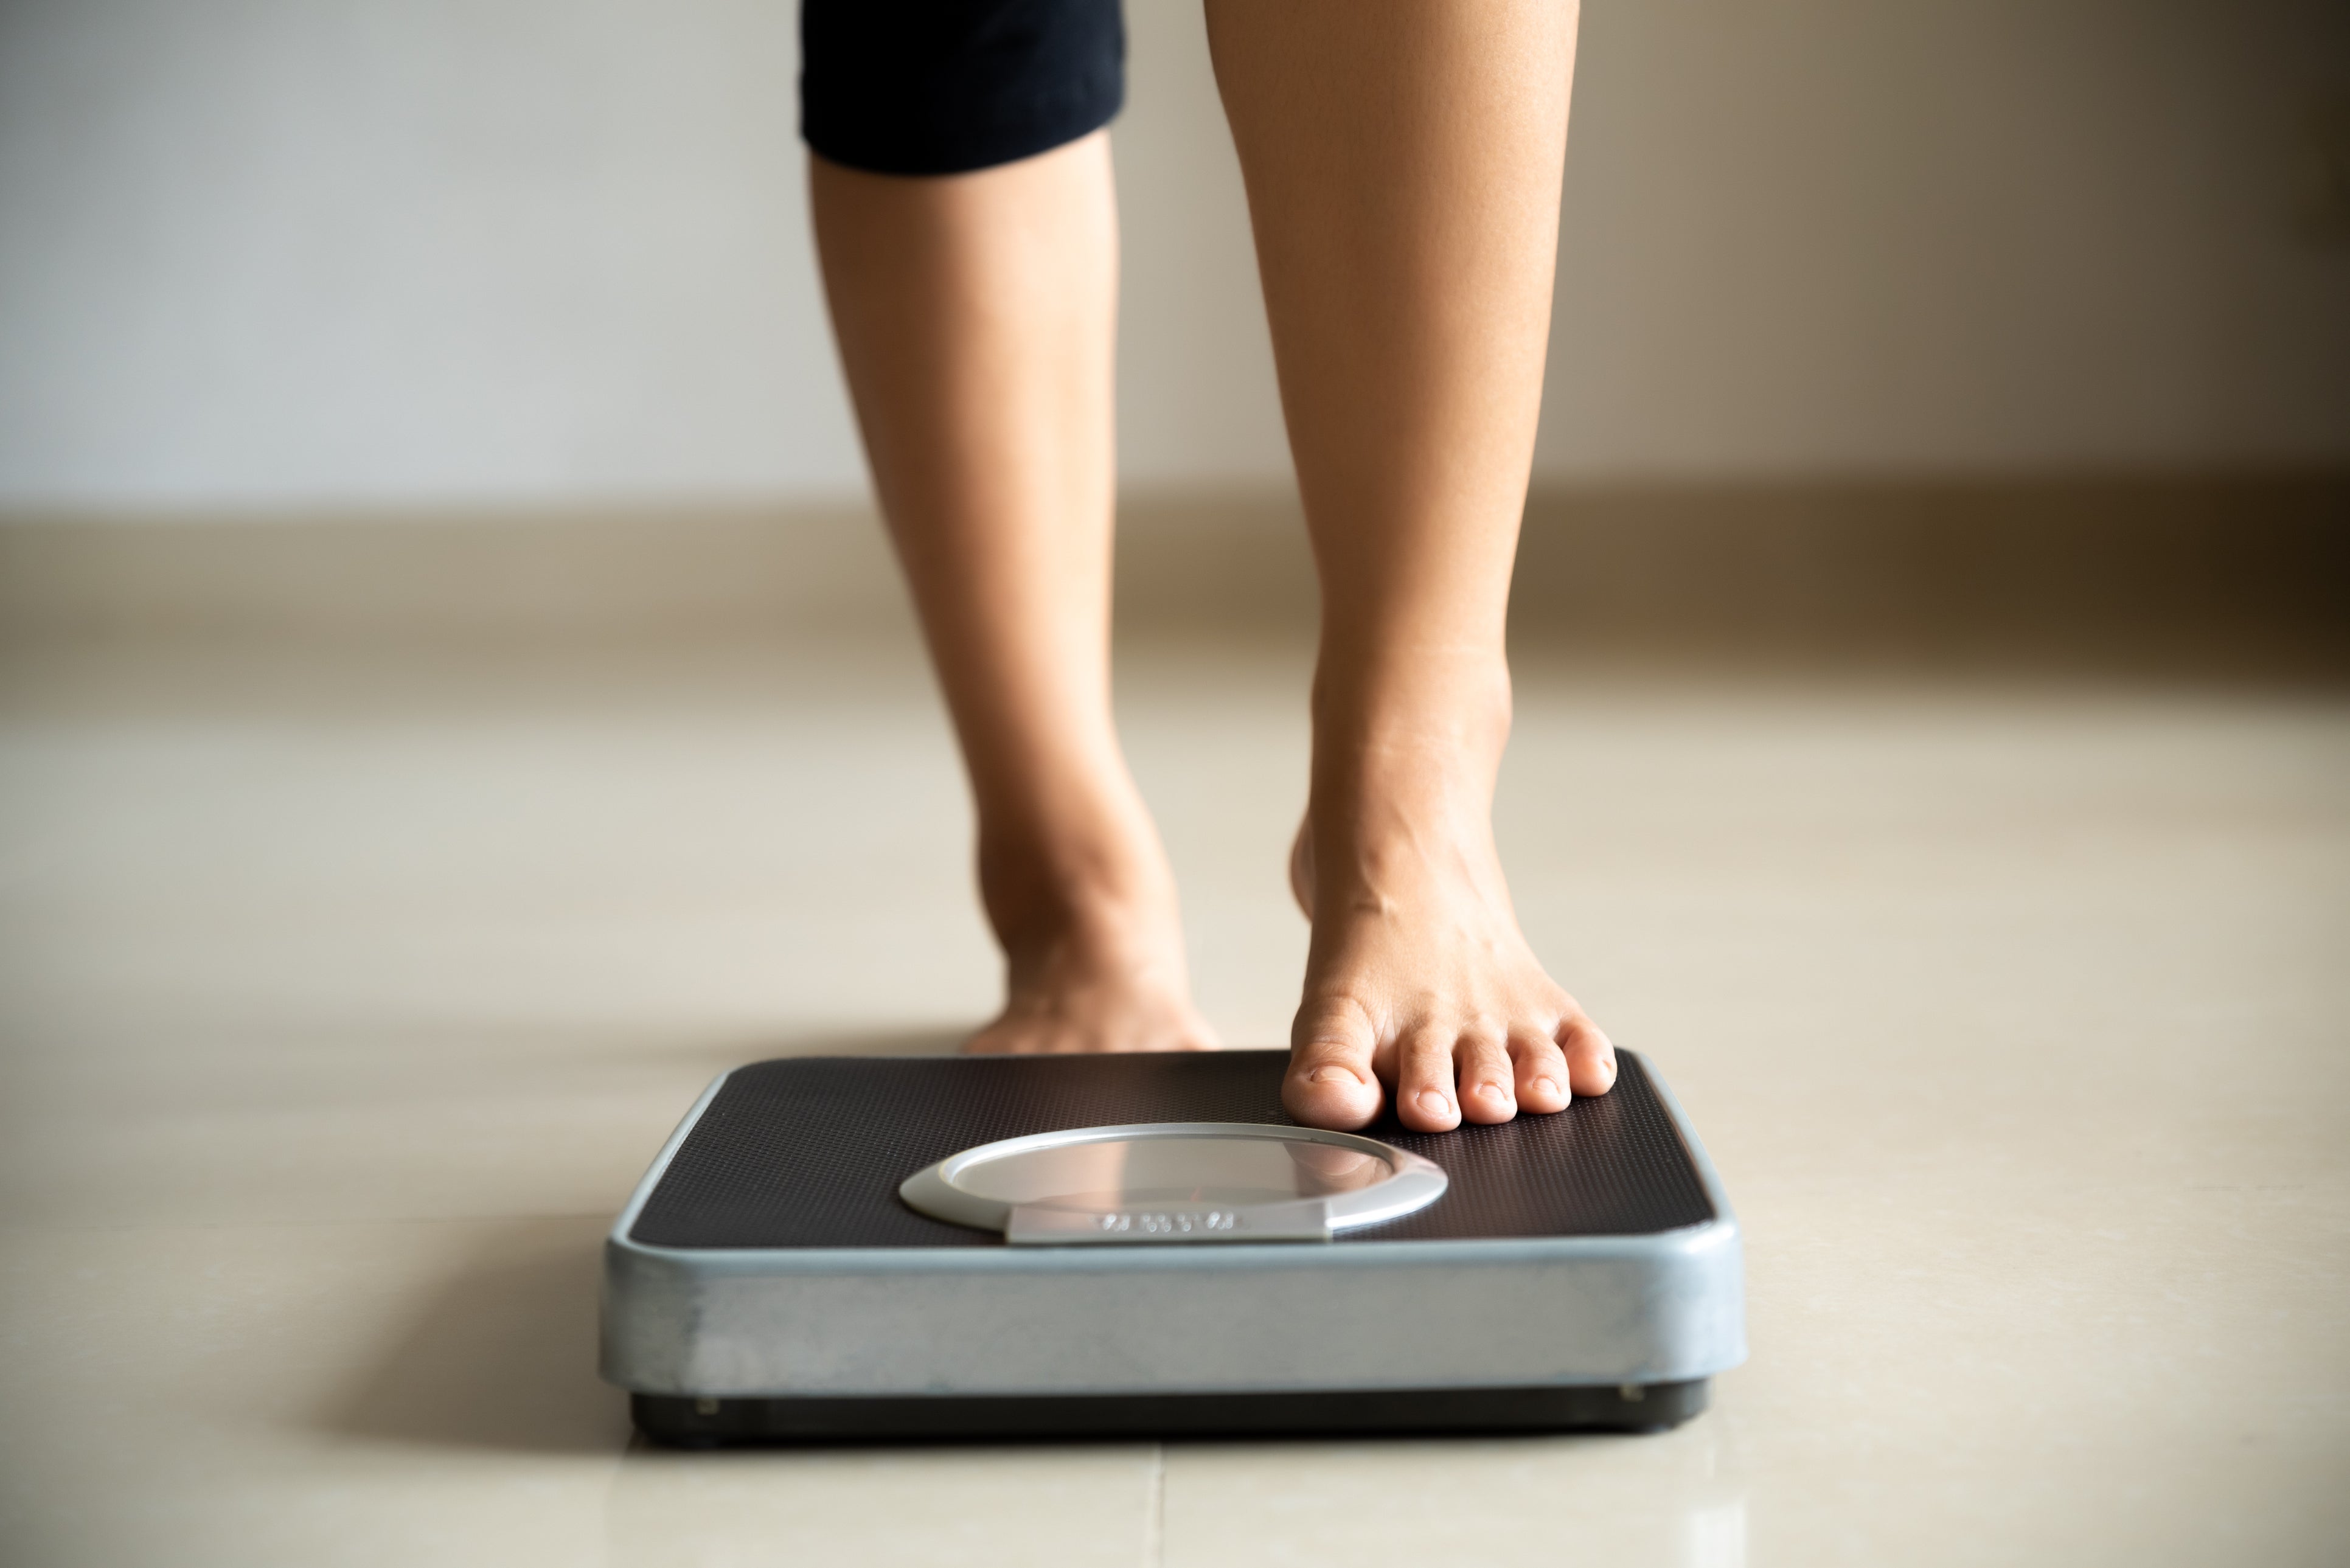 Step up: weighing in regularly boosts your chance of success